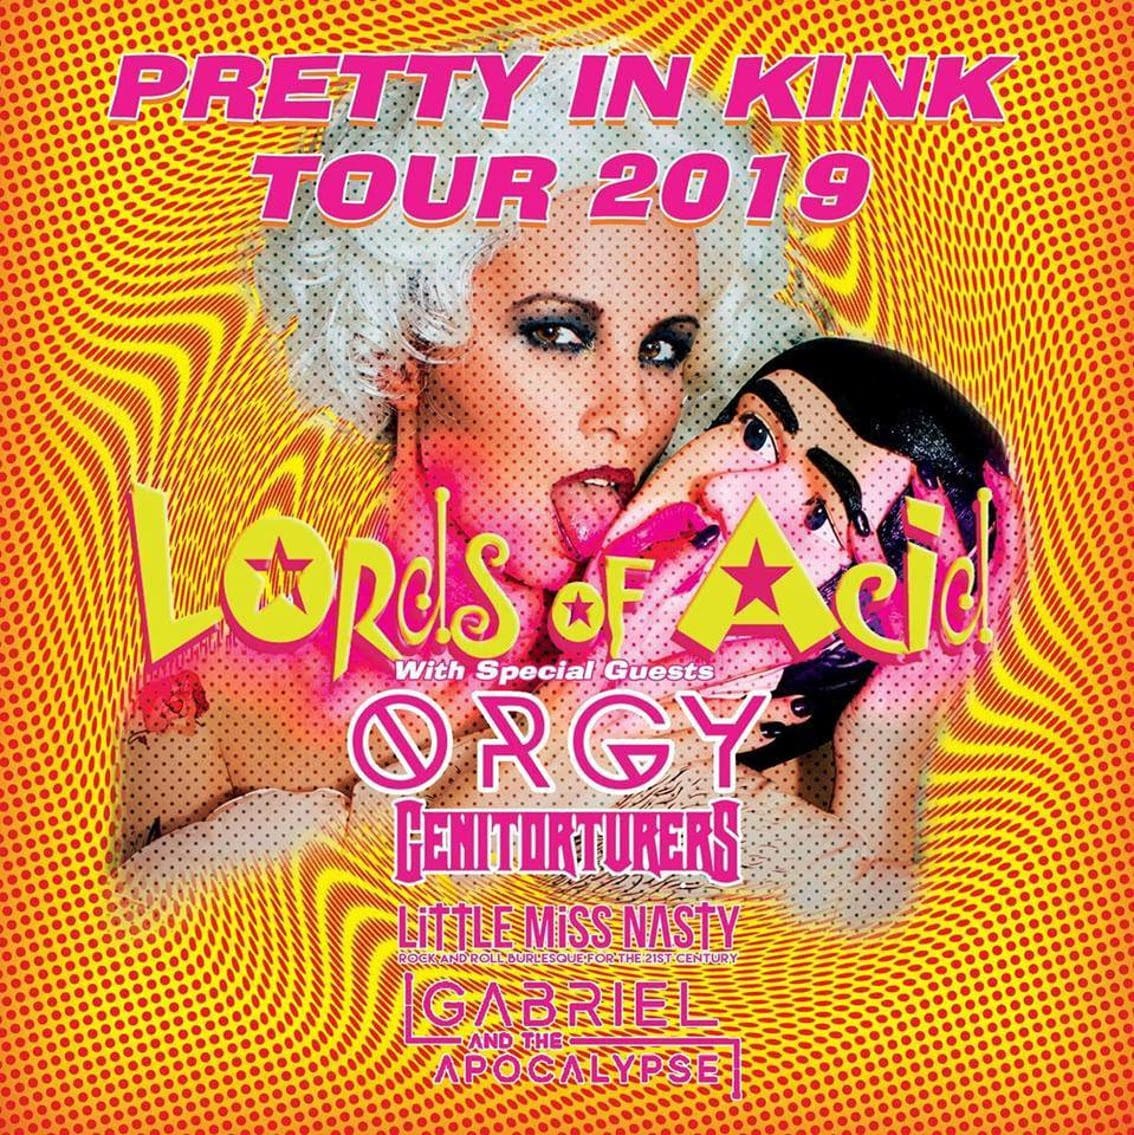 Lords of Acid announce lineup for 'Pretty in Kink tour' (Spoiler alert)